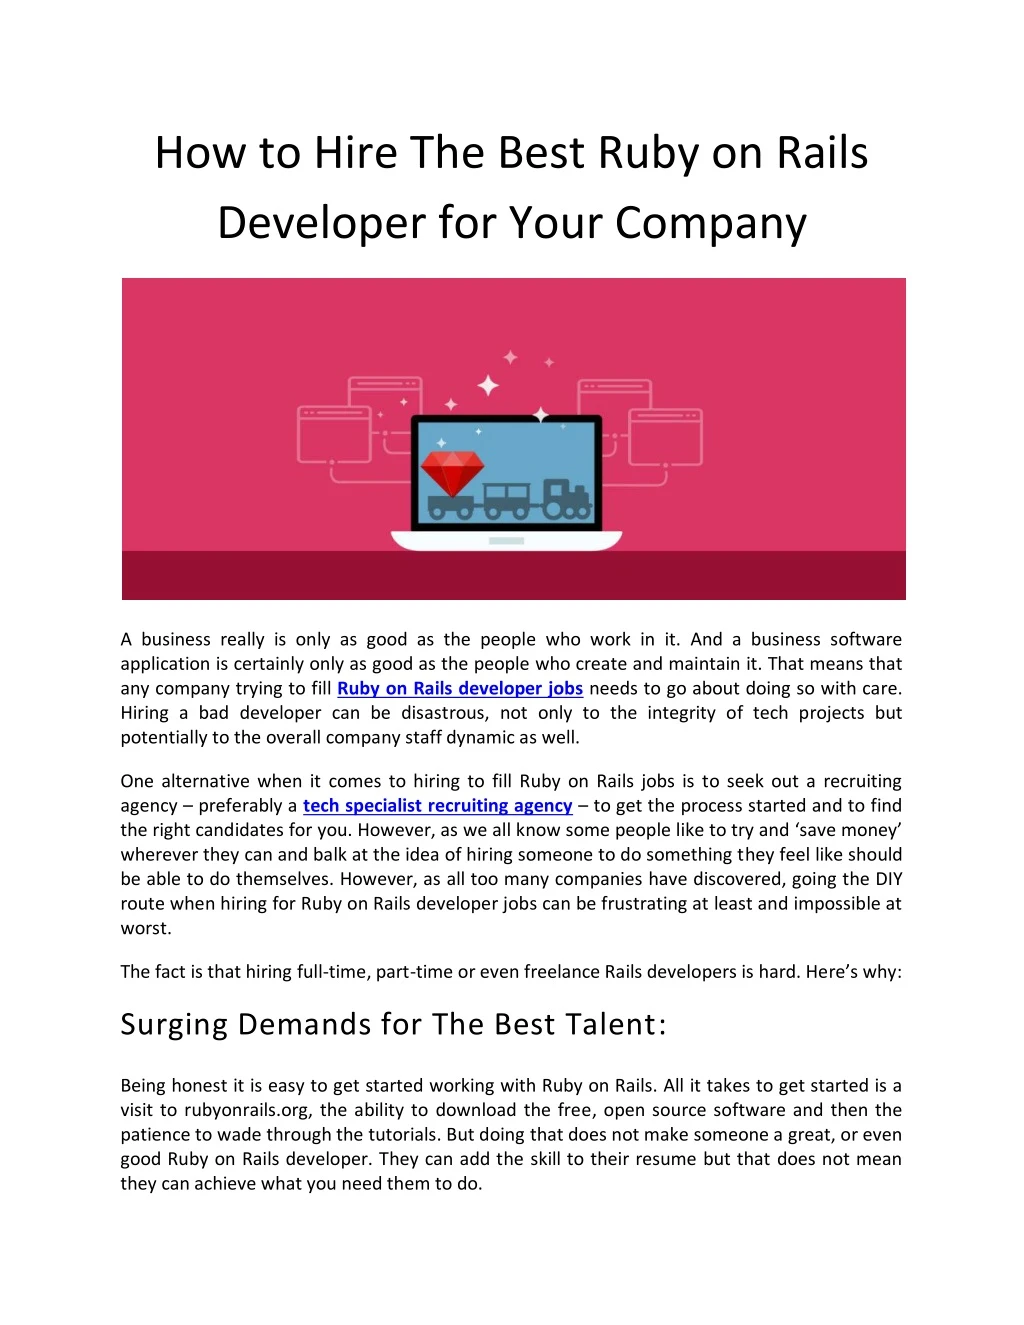 how to hire the best ruby on rails developer